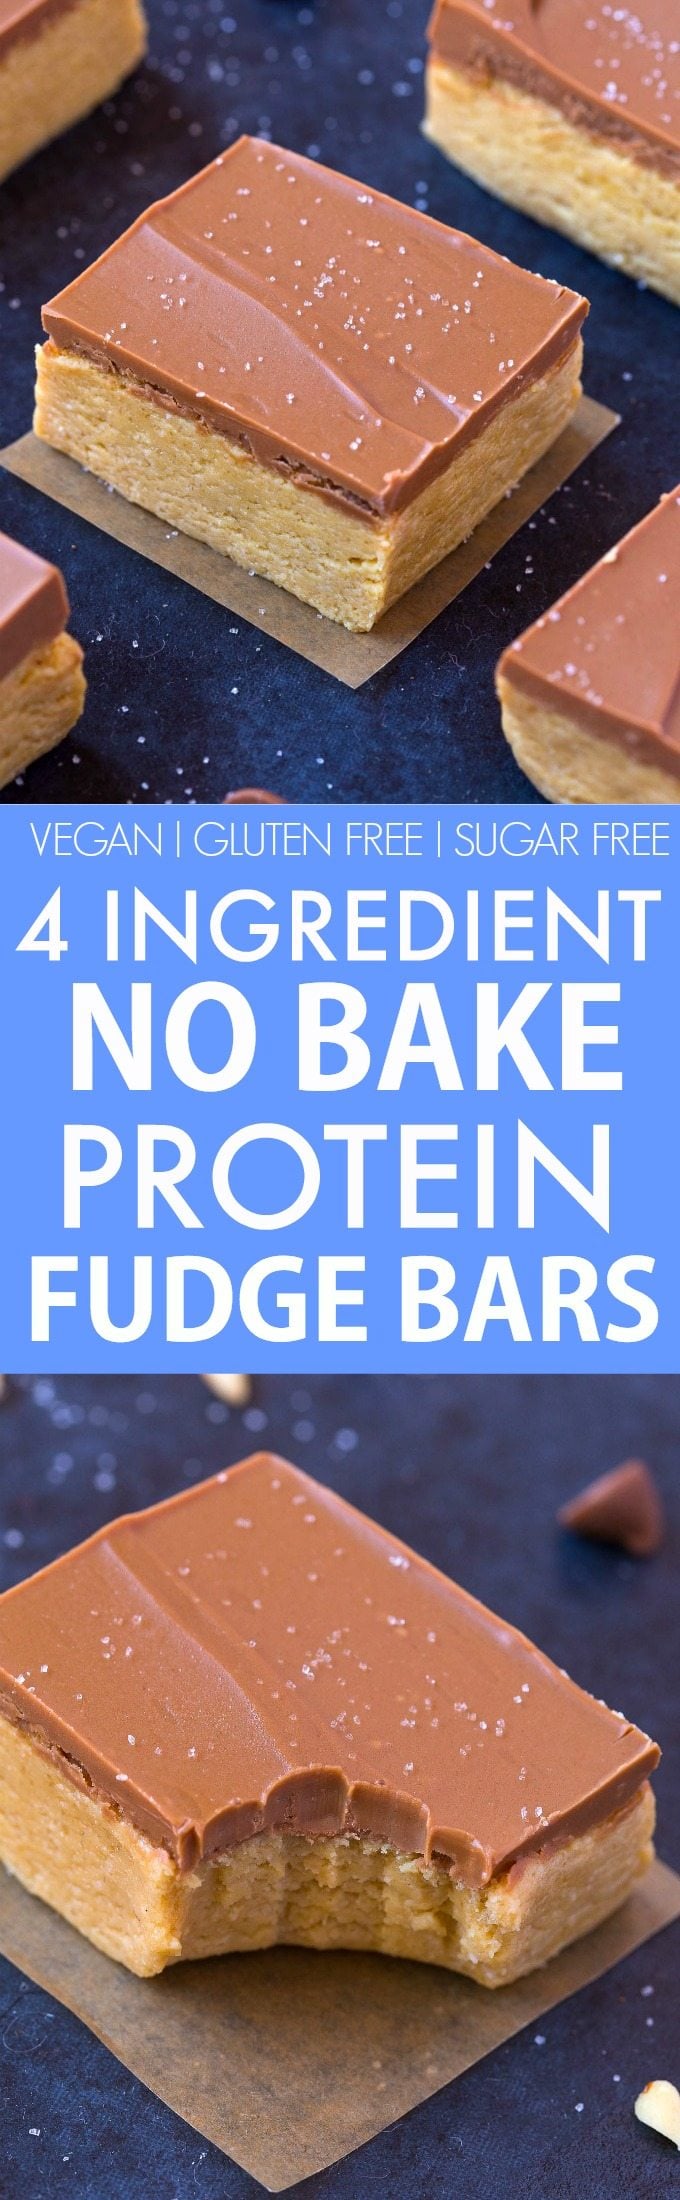 Healthy 4 Ingredient No Bake Protein Fudge Bars (V, GF, DF)- Smooth, creamy and melt in your mouth fudge bars packed with protein and completely guilt-free! {vegan, gluten free, sugar free recipe}- thebigmansworld.com